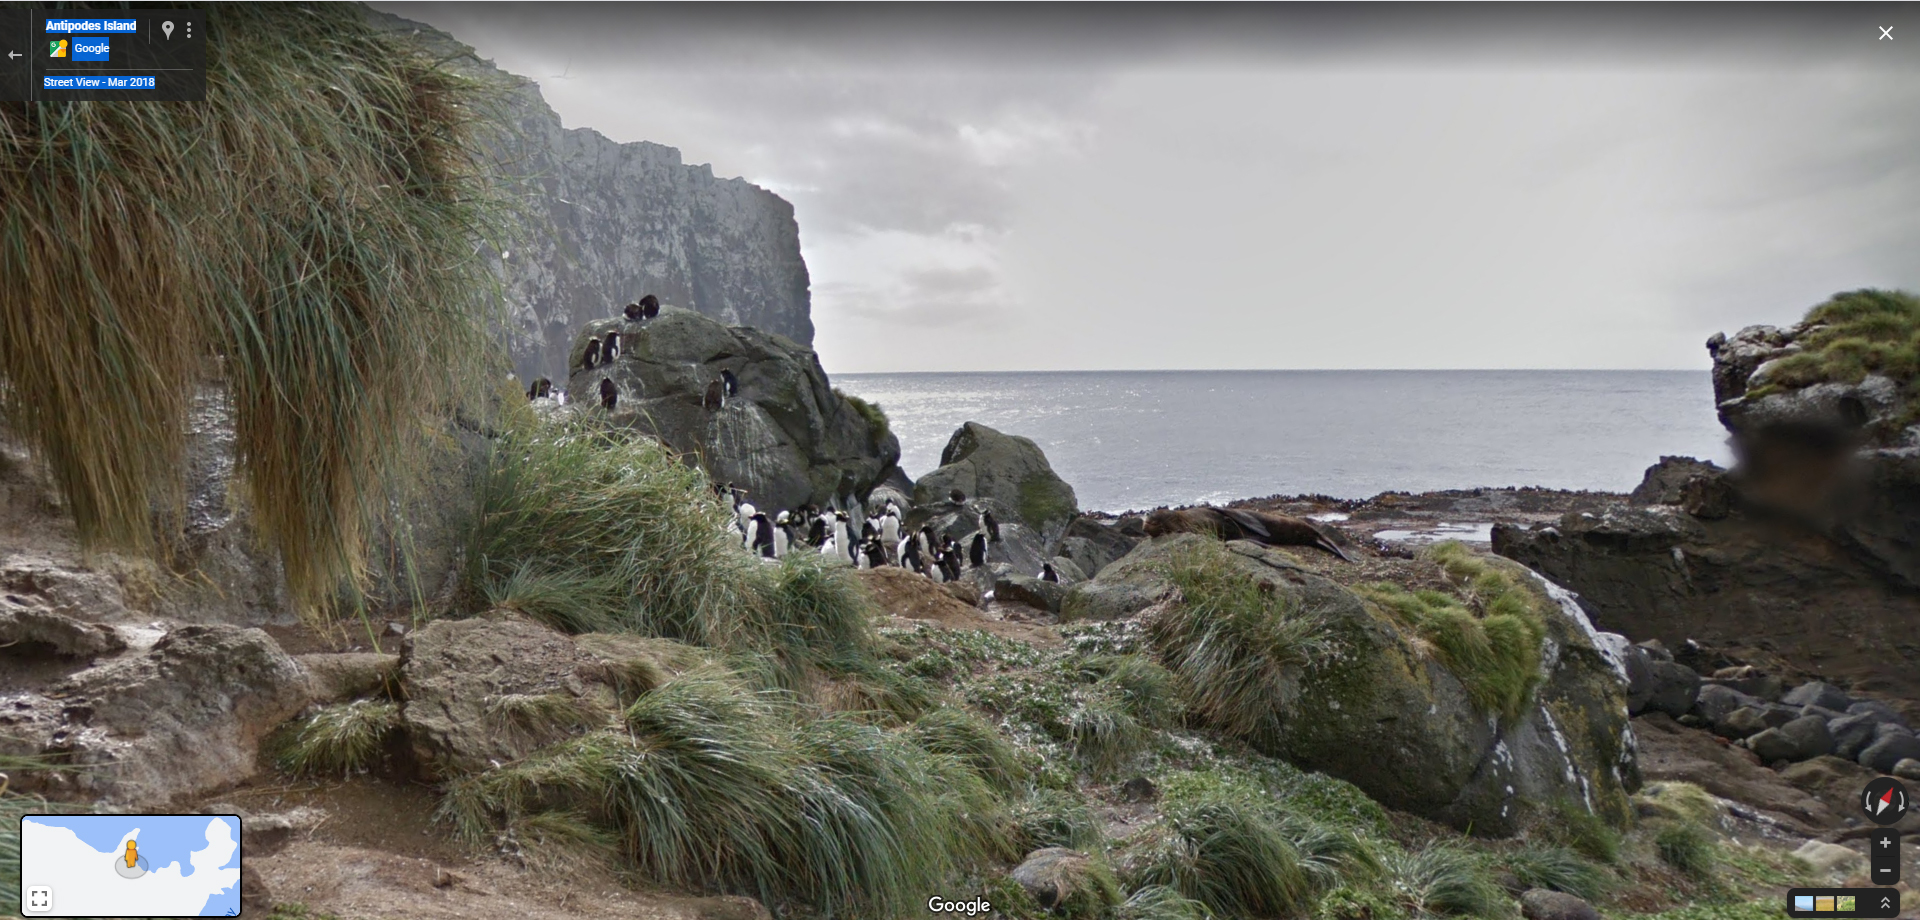 cool places on google earth - cliff - Google